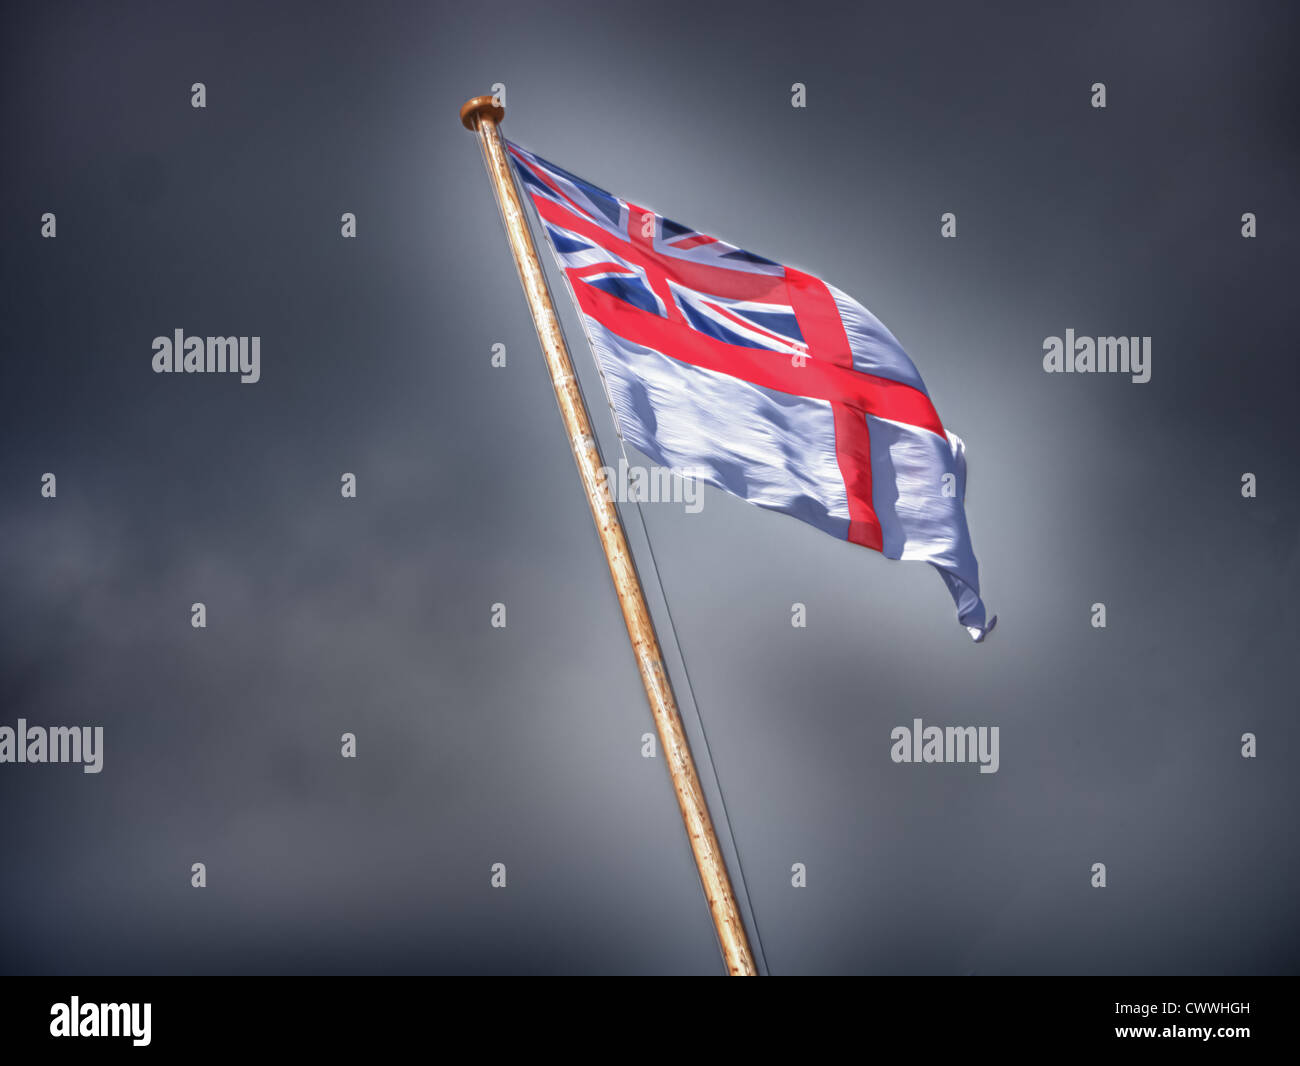 A White Ensign of the Royal Navy flies against storm clouds Stock Photo